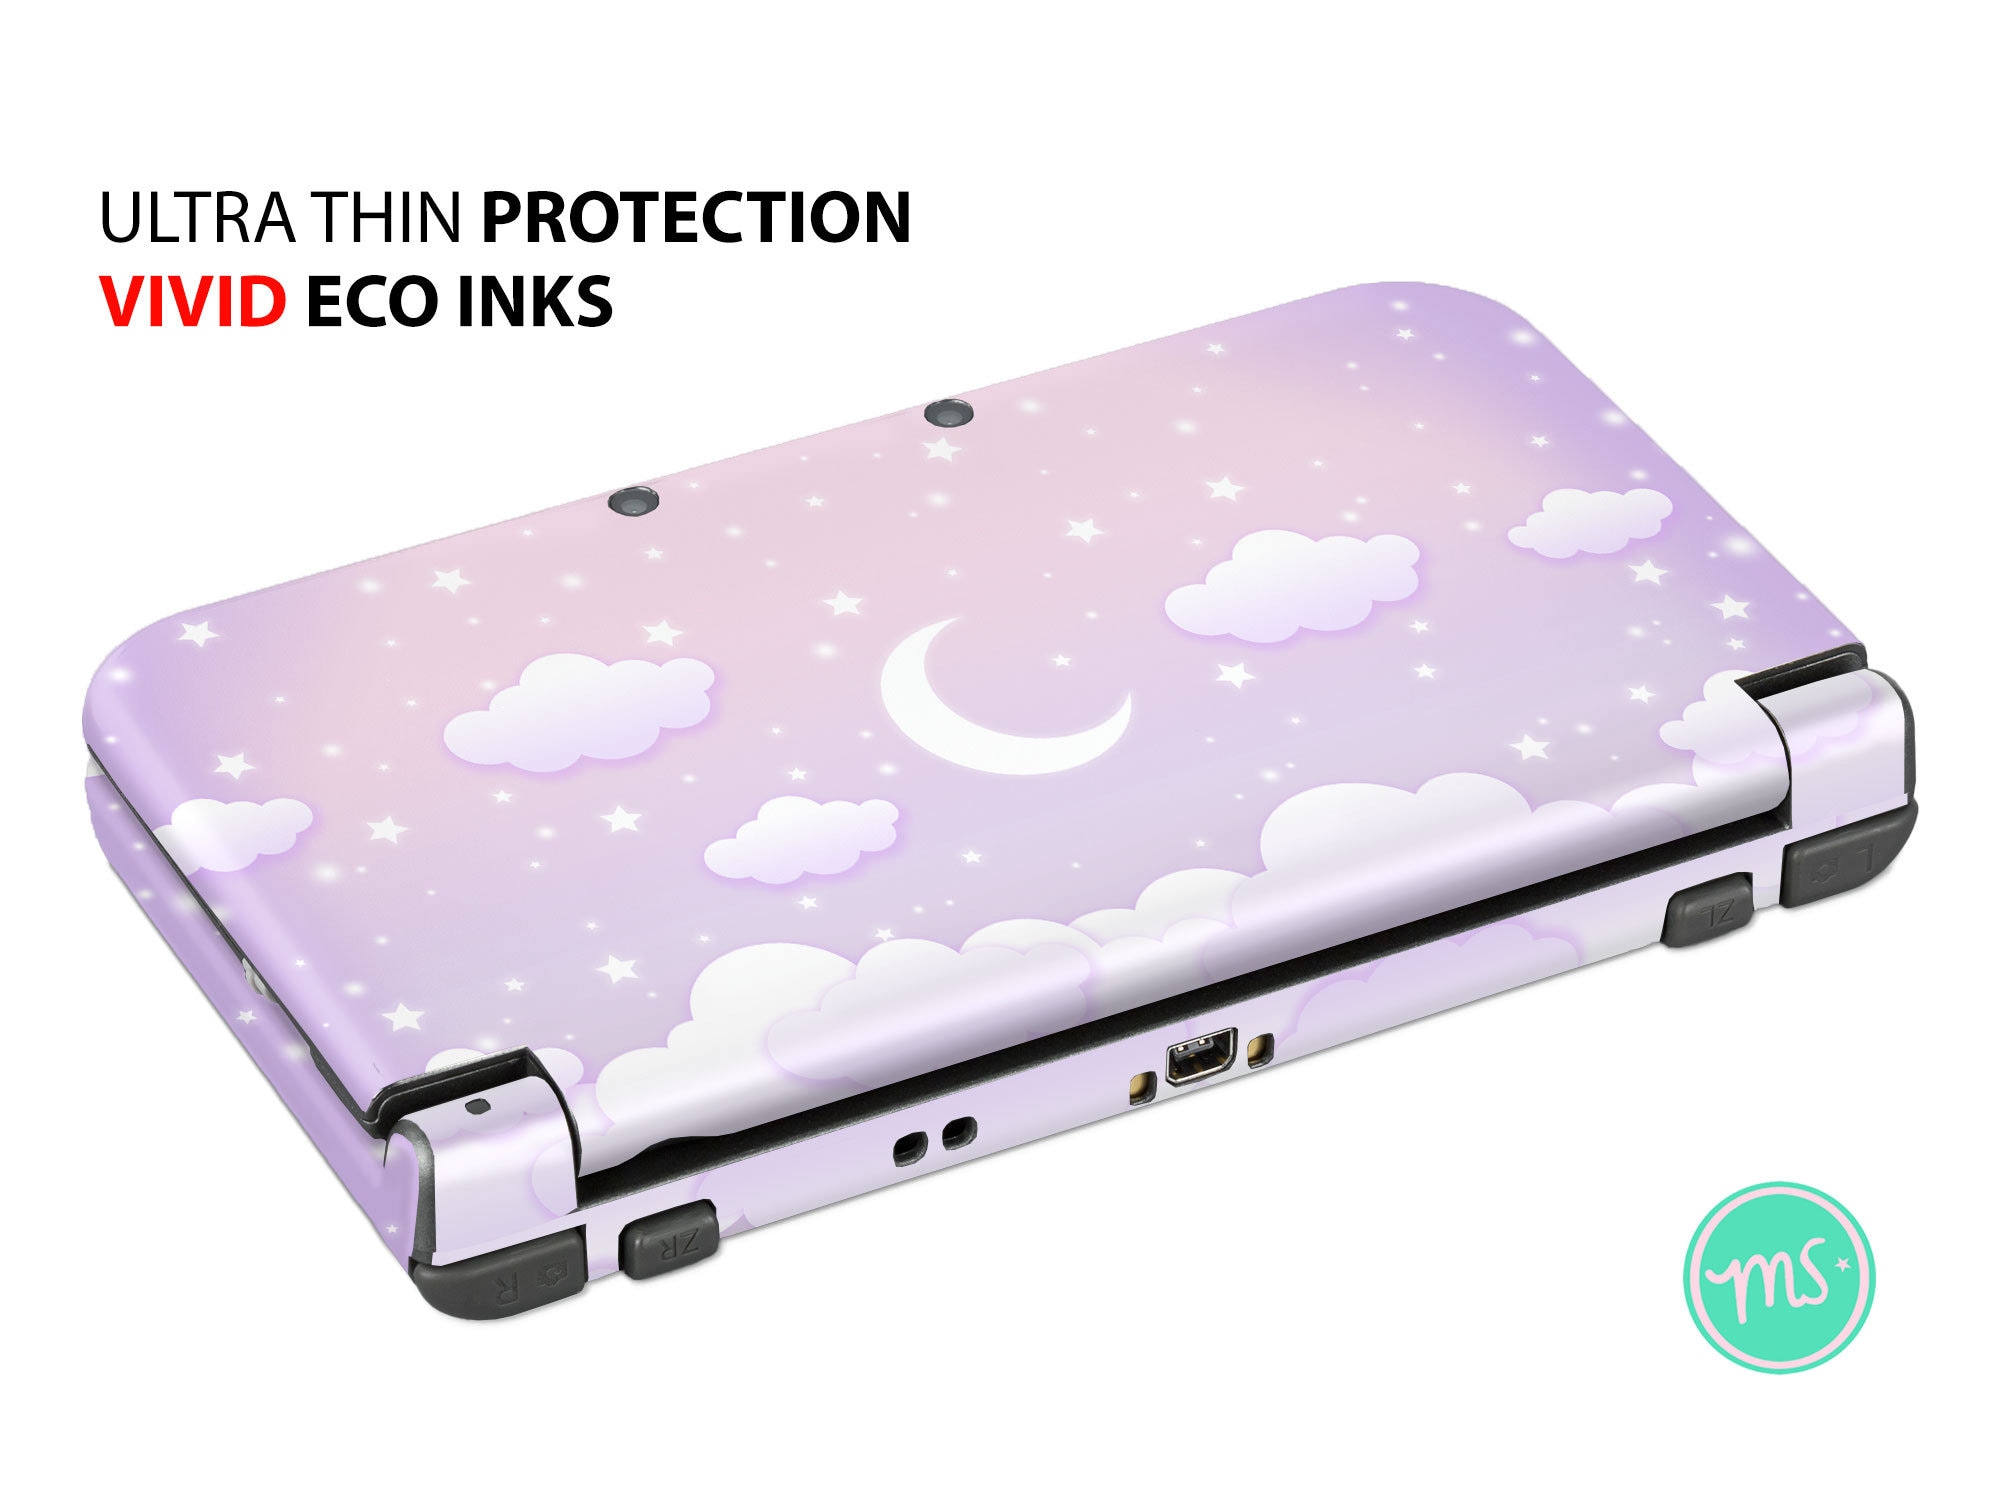 Dripping Sweet Sprinkled Icing - Skin Wrap Decal for Nintendo Switch Lite  Console & Dock - 3DS XL - 2DS - Pro - DSi - Wii - Joy-Con Gaming Controller